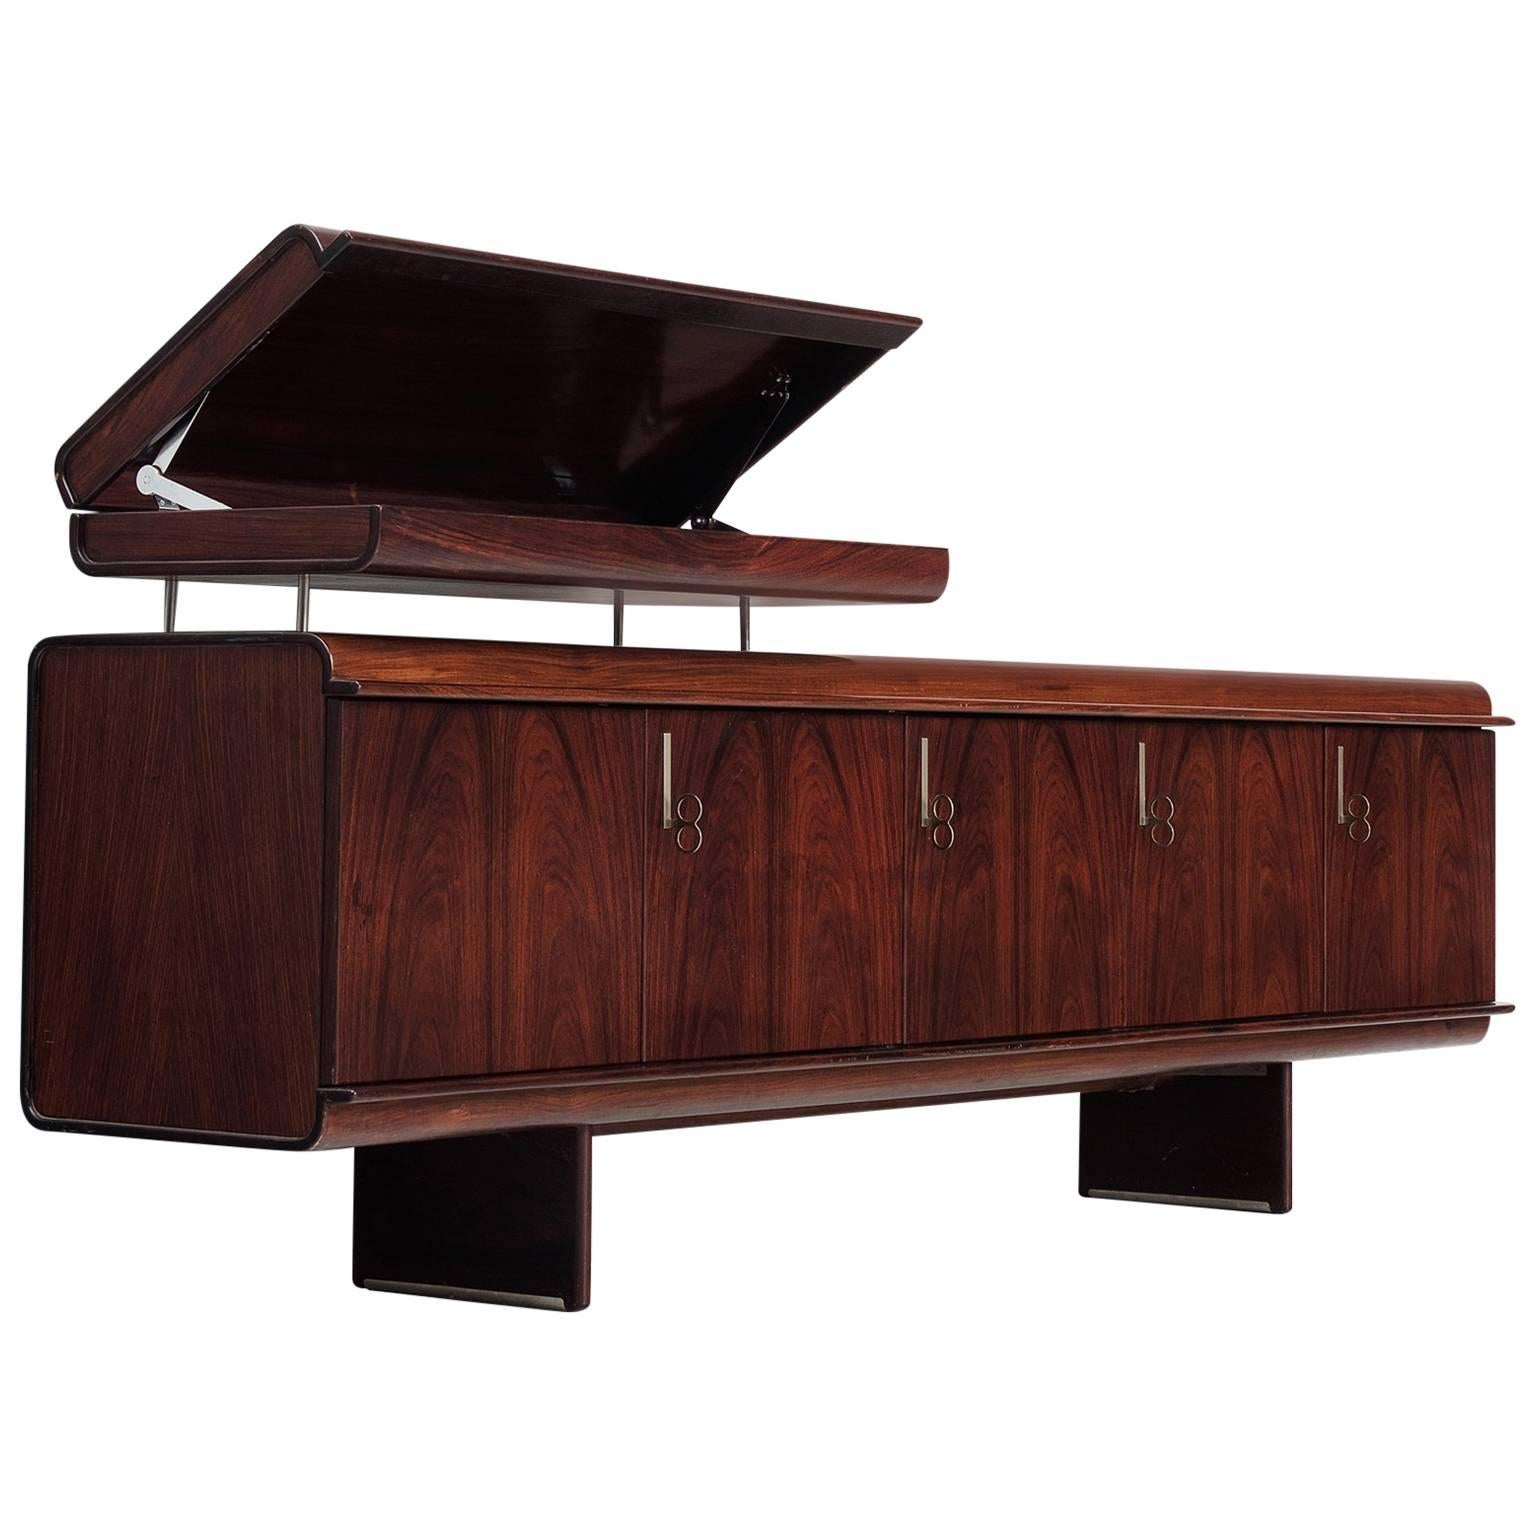 Vittorio Introini Exceptional Freestanding Rosewood Sideboard for Sormani